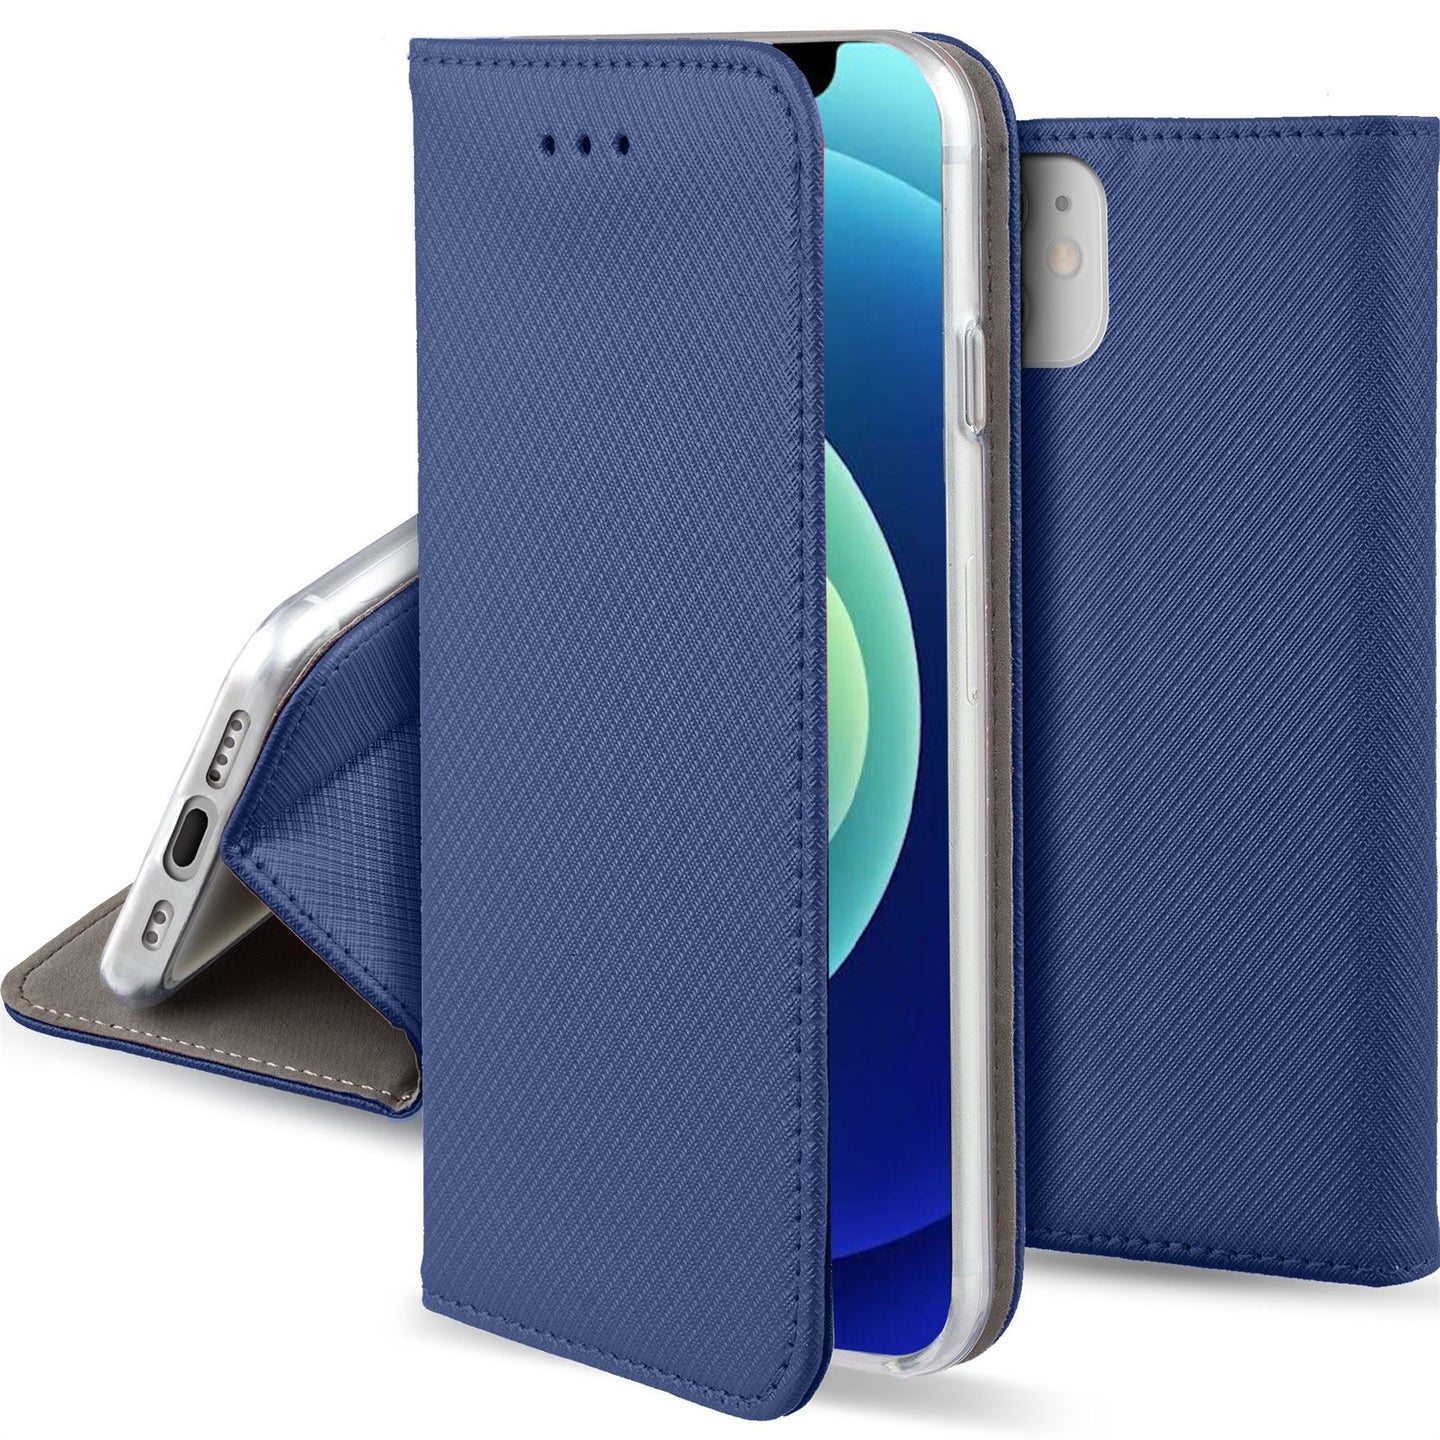 Moozy Case Flip Cover for iPhone 12 mini, Dark Blue - Smart Magnetic Flip Case with Card Holder and Stand